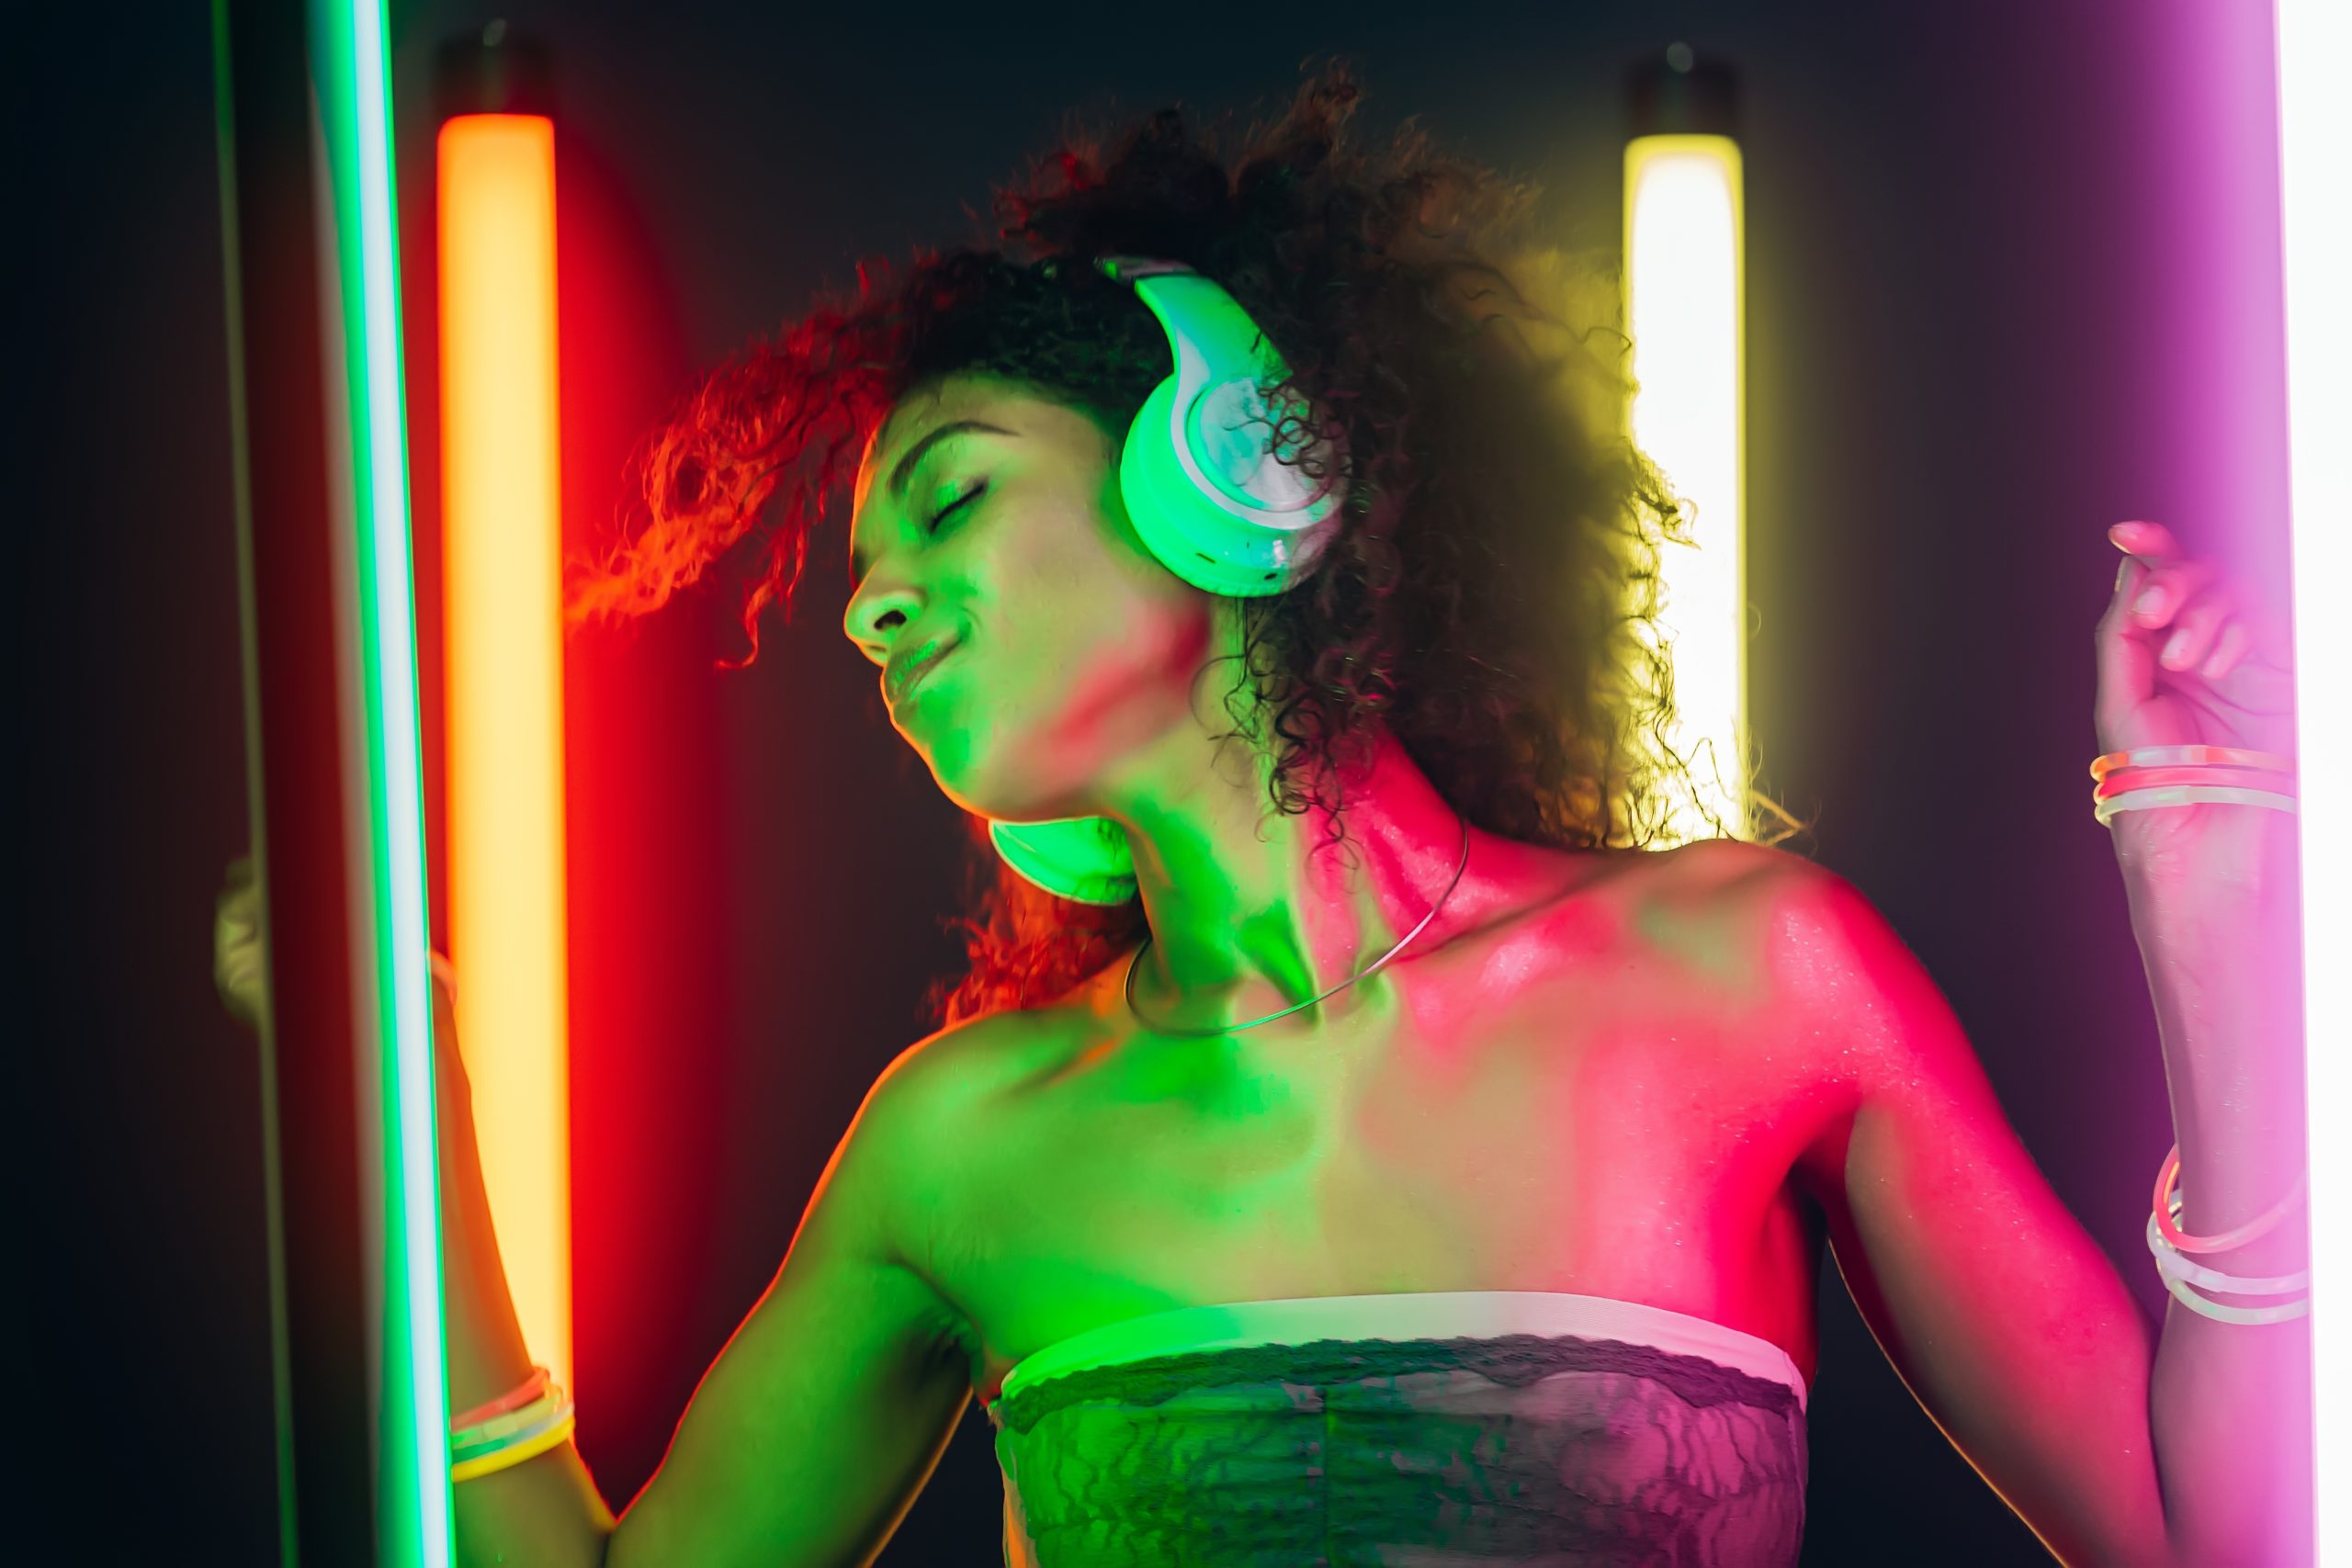 Portrait of party girl dancing to music with headphones on glowing multi-colored lamps in studio